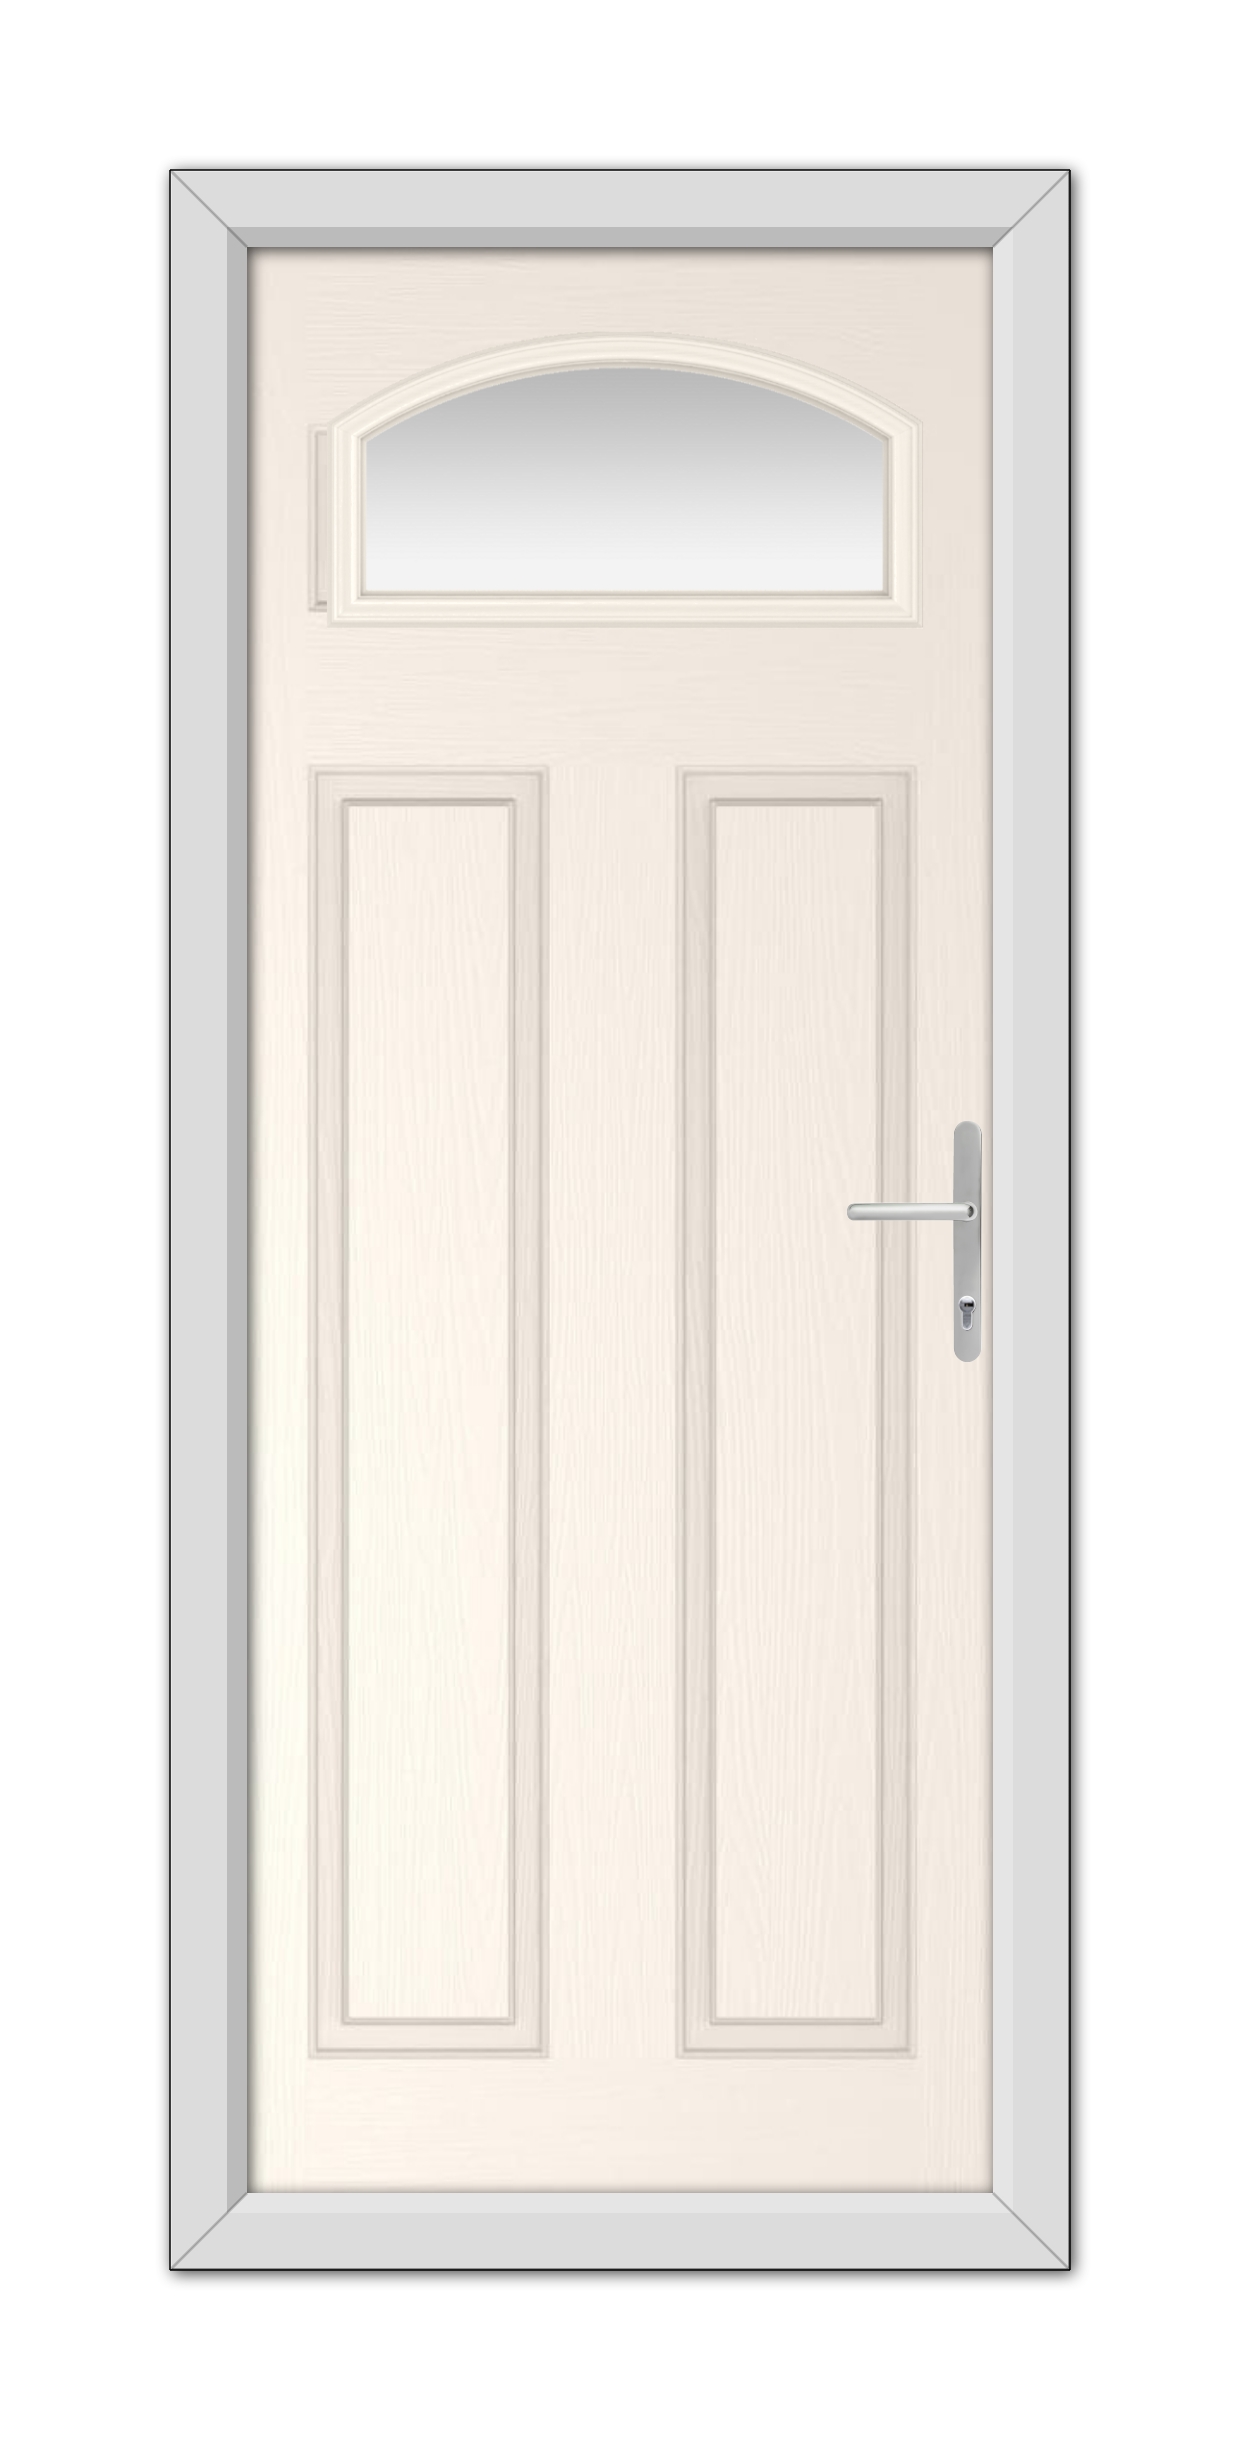 A White Foil Harlington Composite Door 48mm Timber Core with a rounded arch window and a silver handle, set within a gray frame.